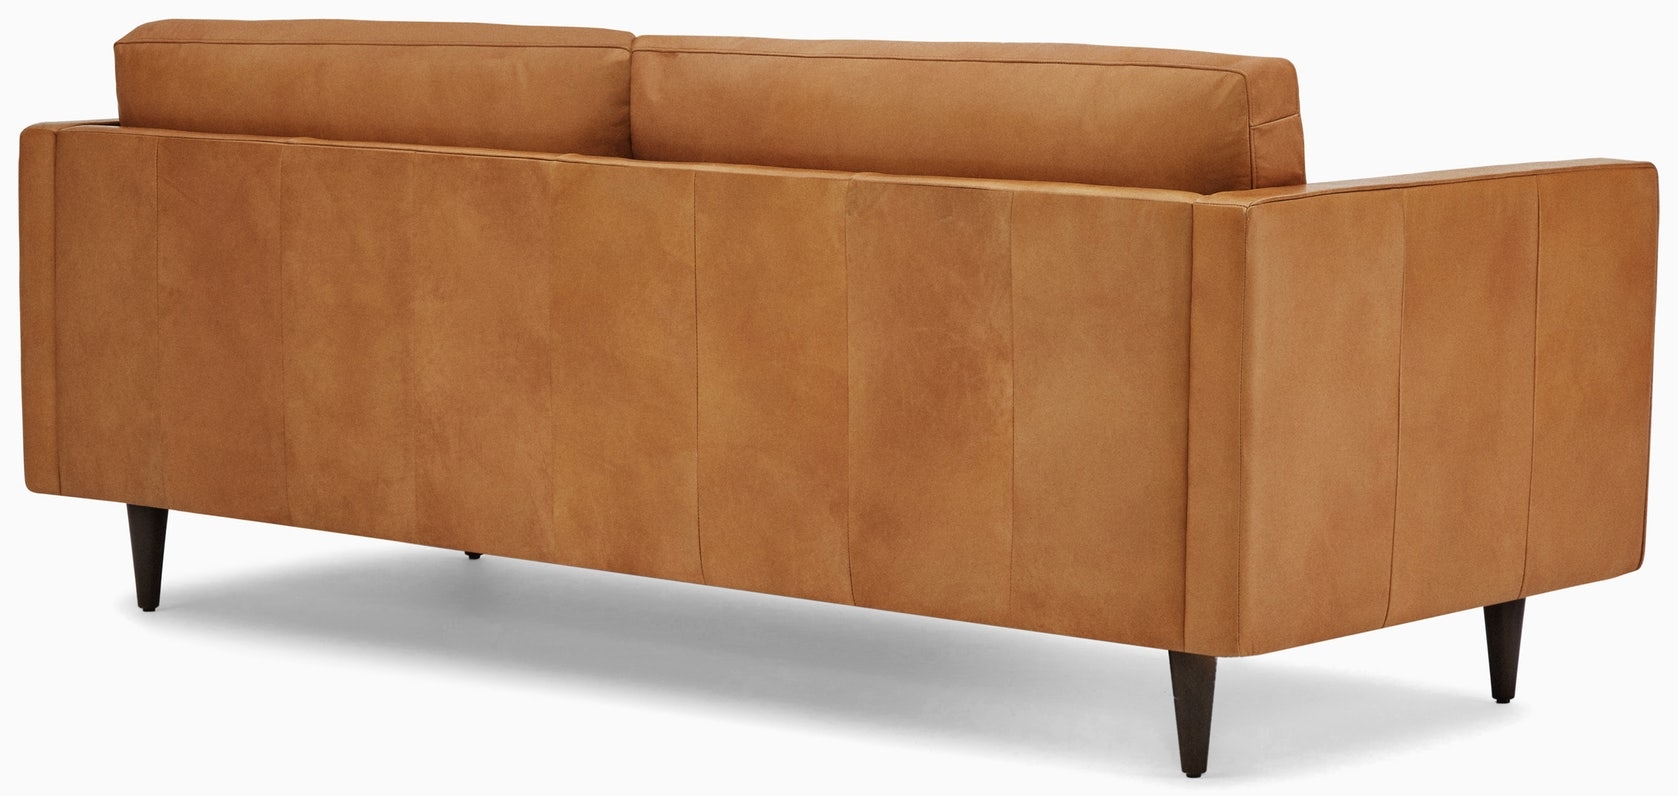 Briar Leather Sofa in Santiago Caramel Leather with Mocha Wood Stain - Image 3